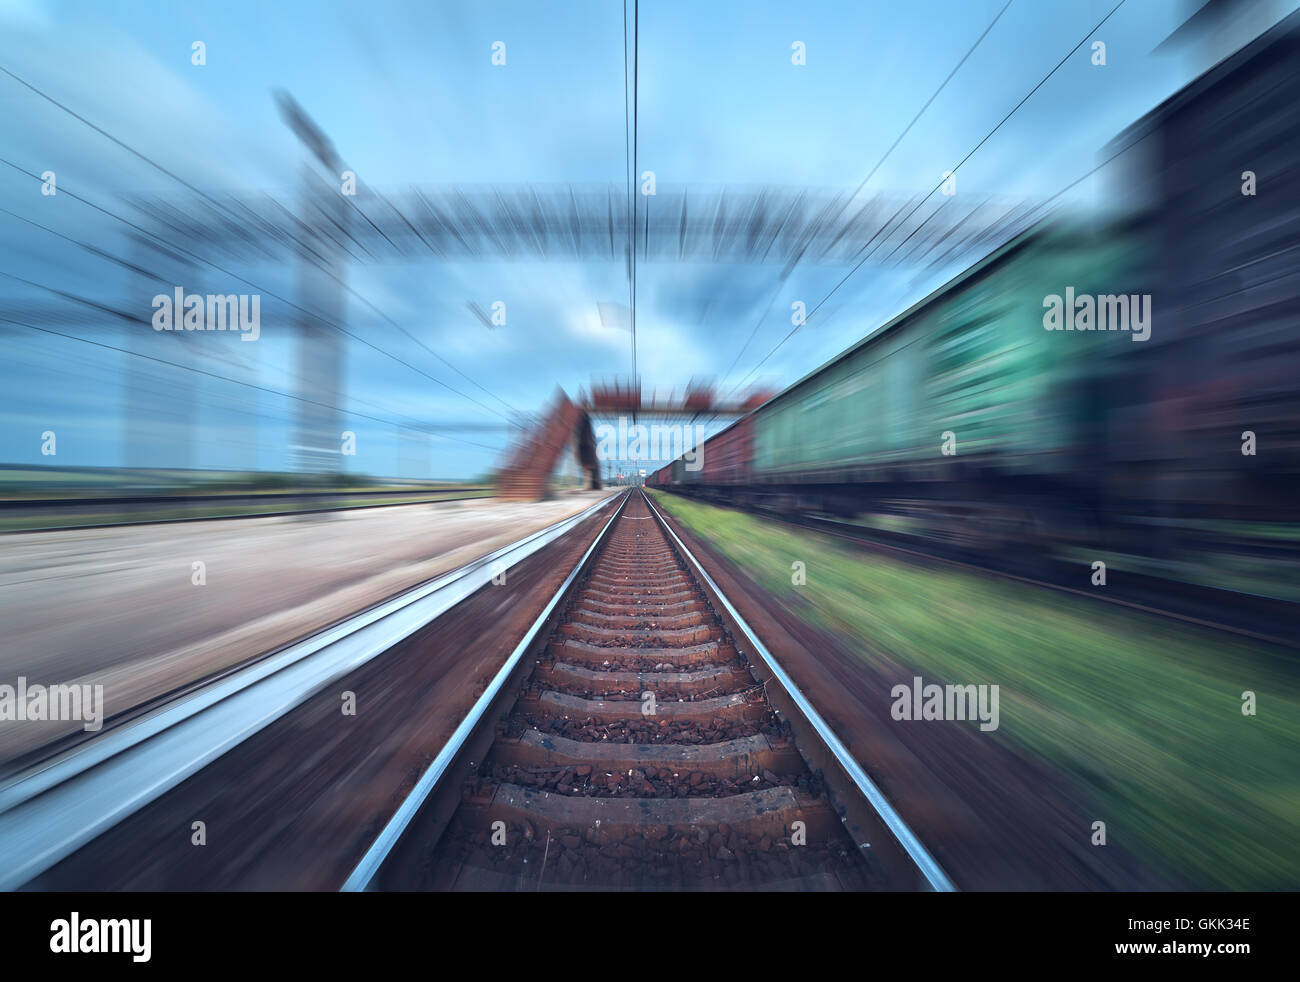 Railway station with cargo wagons in motion at sunset. Railroad with motion blur effect. Railway platform at dusk. Heavy industr Stock Photo